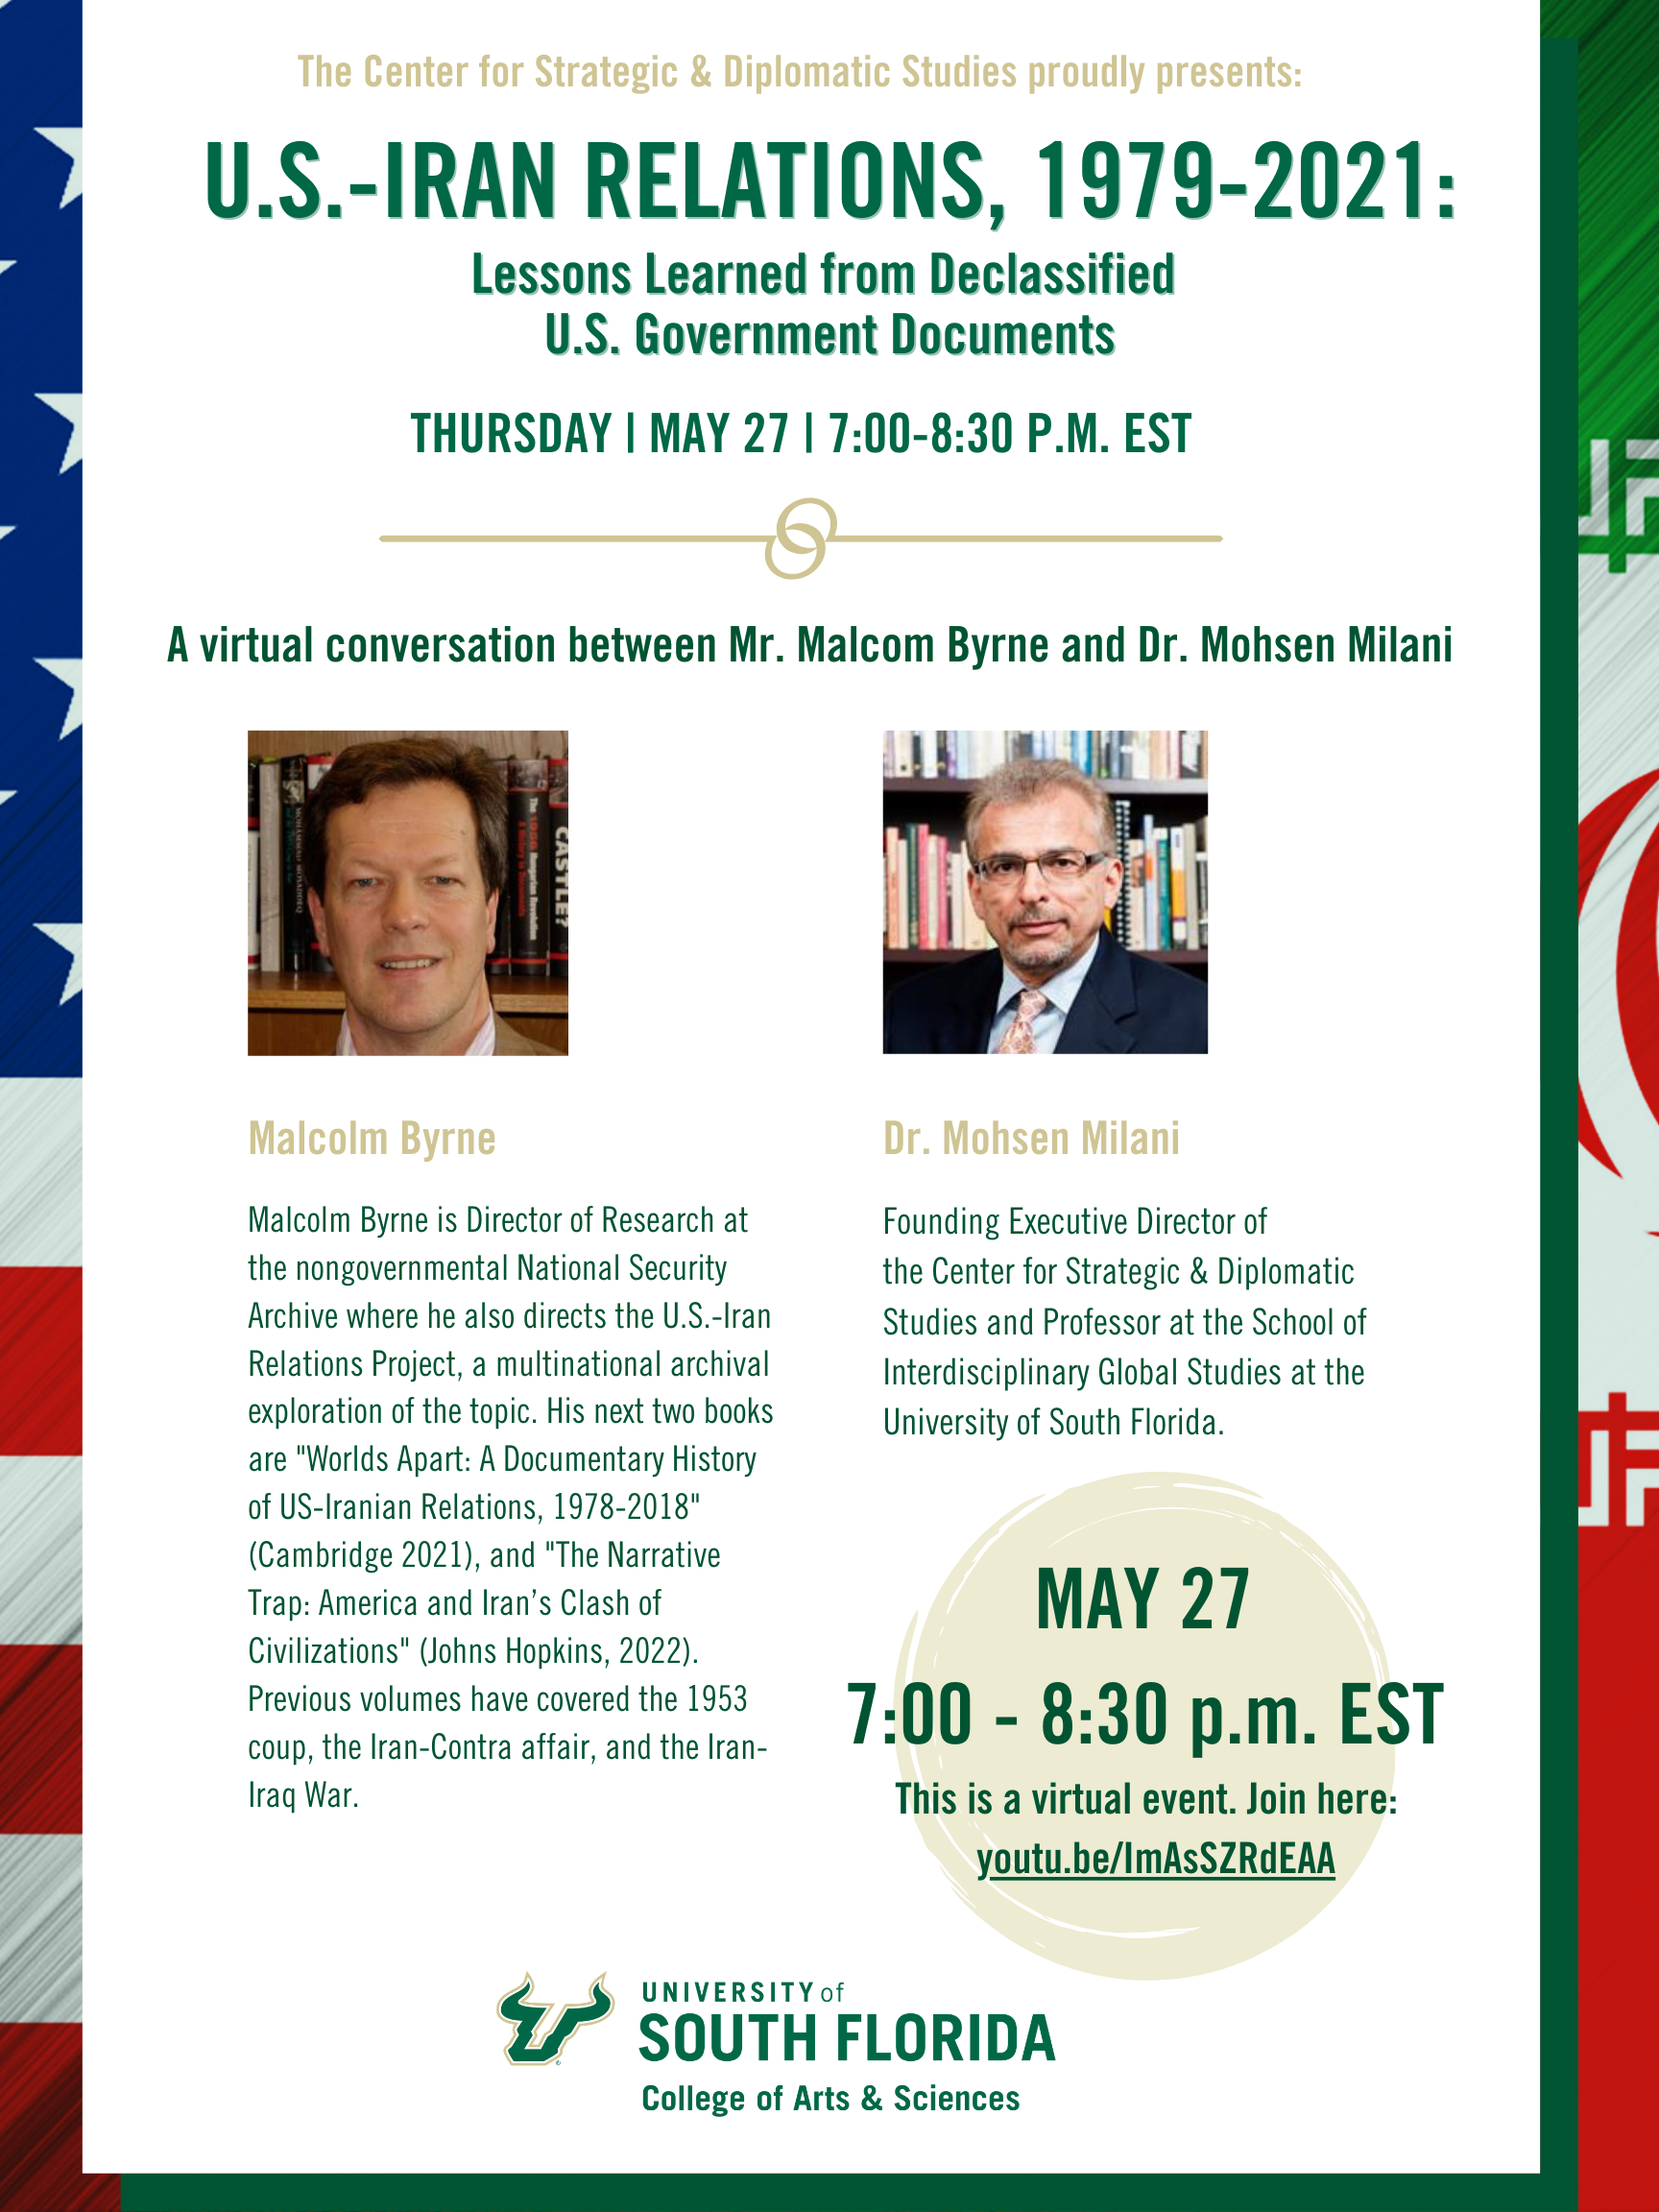 U.S.-IRAN RELATIONS conference banner